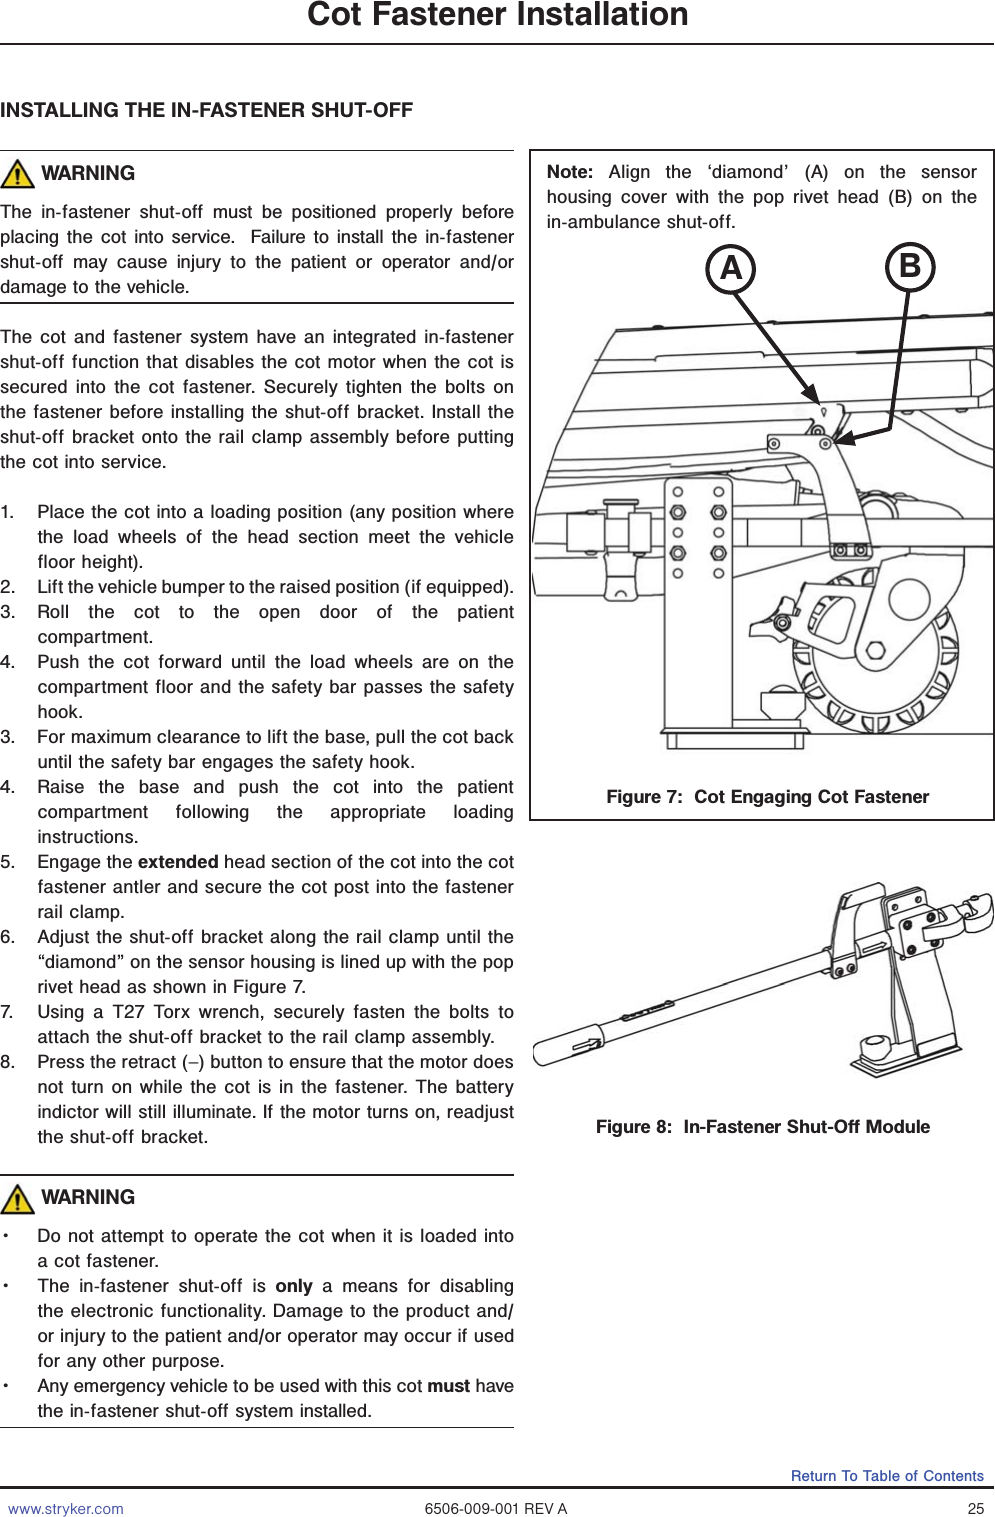 www.stryker.com 6506-009-001 REV A 25Return To Table of ContentsFigure 8:  In-Fastener Shut-Off ModuleINSTALLING THE IN-FASTENER SHUT-OFF WARNINGThe in-fastener shut-off must be positioned properly before placing the cot into service.  Failure to install the in-fastener shut-off may cause injury to the patient or operator and/or damage to the vehicle.The cot and fastener system have an integrated in-fastener shut-off function that disables the cot motor when the cot is secured into the cot fastener. Securely tighten the bolts on the fastener before installing the shut-off bracket. Install the shut-off bracket onto the rail clamp assembly before putting the cot into service.1.  Place the cot into a loading position (any position where the load wheels of the head section meet the vehicle floor height).  2.  Lift the vehicle bumper to the raised position (if equipped).3. Roll the cot to the open door of the patient  compartment. 4.  Push the cot forward until the load wheels are on the compartment floor and the safety bar passes the safety hook. 3.  For maximum clearance to lift the base, pull the cot back until the safety bar engages the safety hook.4.  Raise the base and push the cot into the patient compartment following the appropriate loading instructions.5. Engage the extended head section of the cot into the cot fastener antler and secure the cot post into the fastener rail clamp.6.  Adjust the shut-off bracket along the rail clamp until the “diamond” on the sensor housing is lined up with the pop rivet head as shown in Figure 7.7.  Using a T27 Torx wrench, securely fasten the bolts to attach the shut-off bracket to the rail clamp assembly.8.  Press the retract (–) button to ensure that the motor does not turn on while the cot is in the fastener. The battery indictor will still illuminate. If the motor turns on, readjust the shut-off bracket. WARNINGǨɣ Do not attempt to operate the cot when it is loaded into a cot fastener. Ǩɣ The in-fastener shut-off is only a means for disabling the electronic functionality. Damage to the product and/or injury to the patient and/or operator may occur if used for any other purpose.  Ǩɣ Any emergency vehicle to be used with this cot must have the in-fastener shut-off system installed.Cot Fastener InstallationFigure 7:  Cot Engaging Cot FastenerNote: Align the ‘diamond’ (A) on the sensor housing cover with the pop rivet head (B) on the in-ambulance shut-off.AB